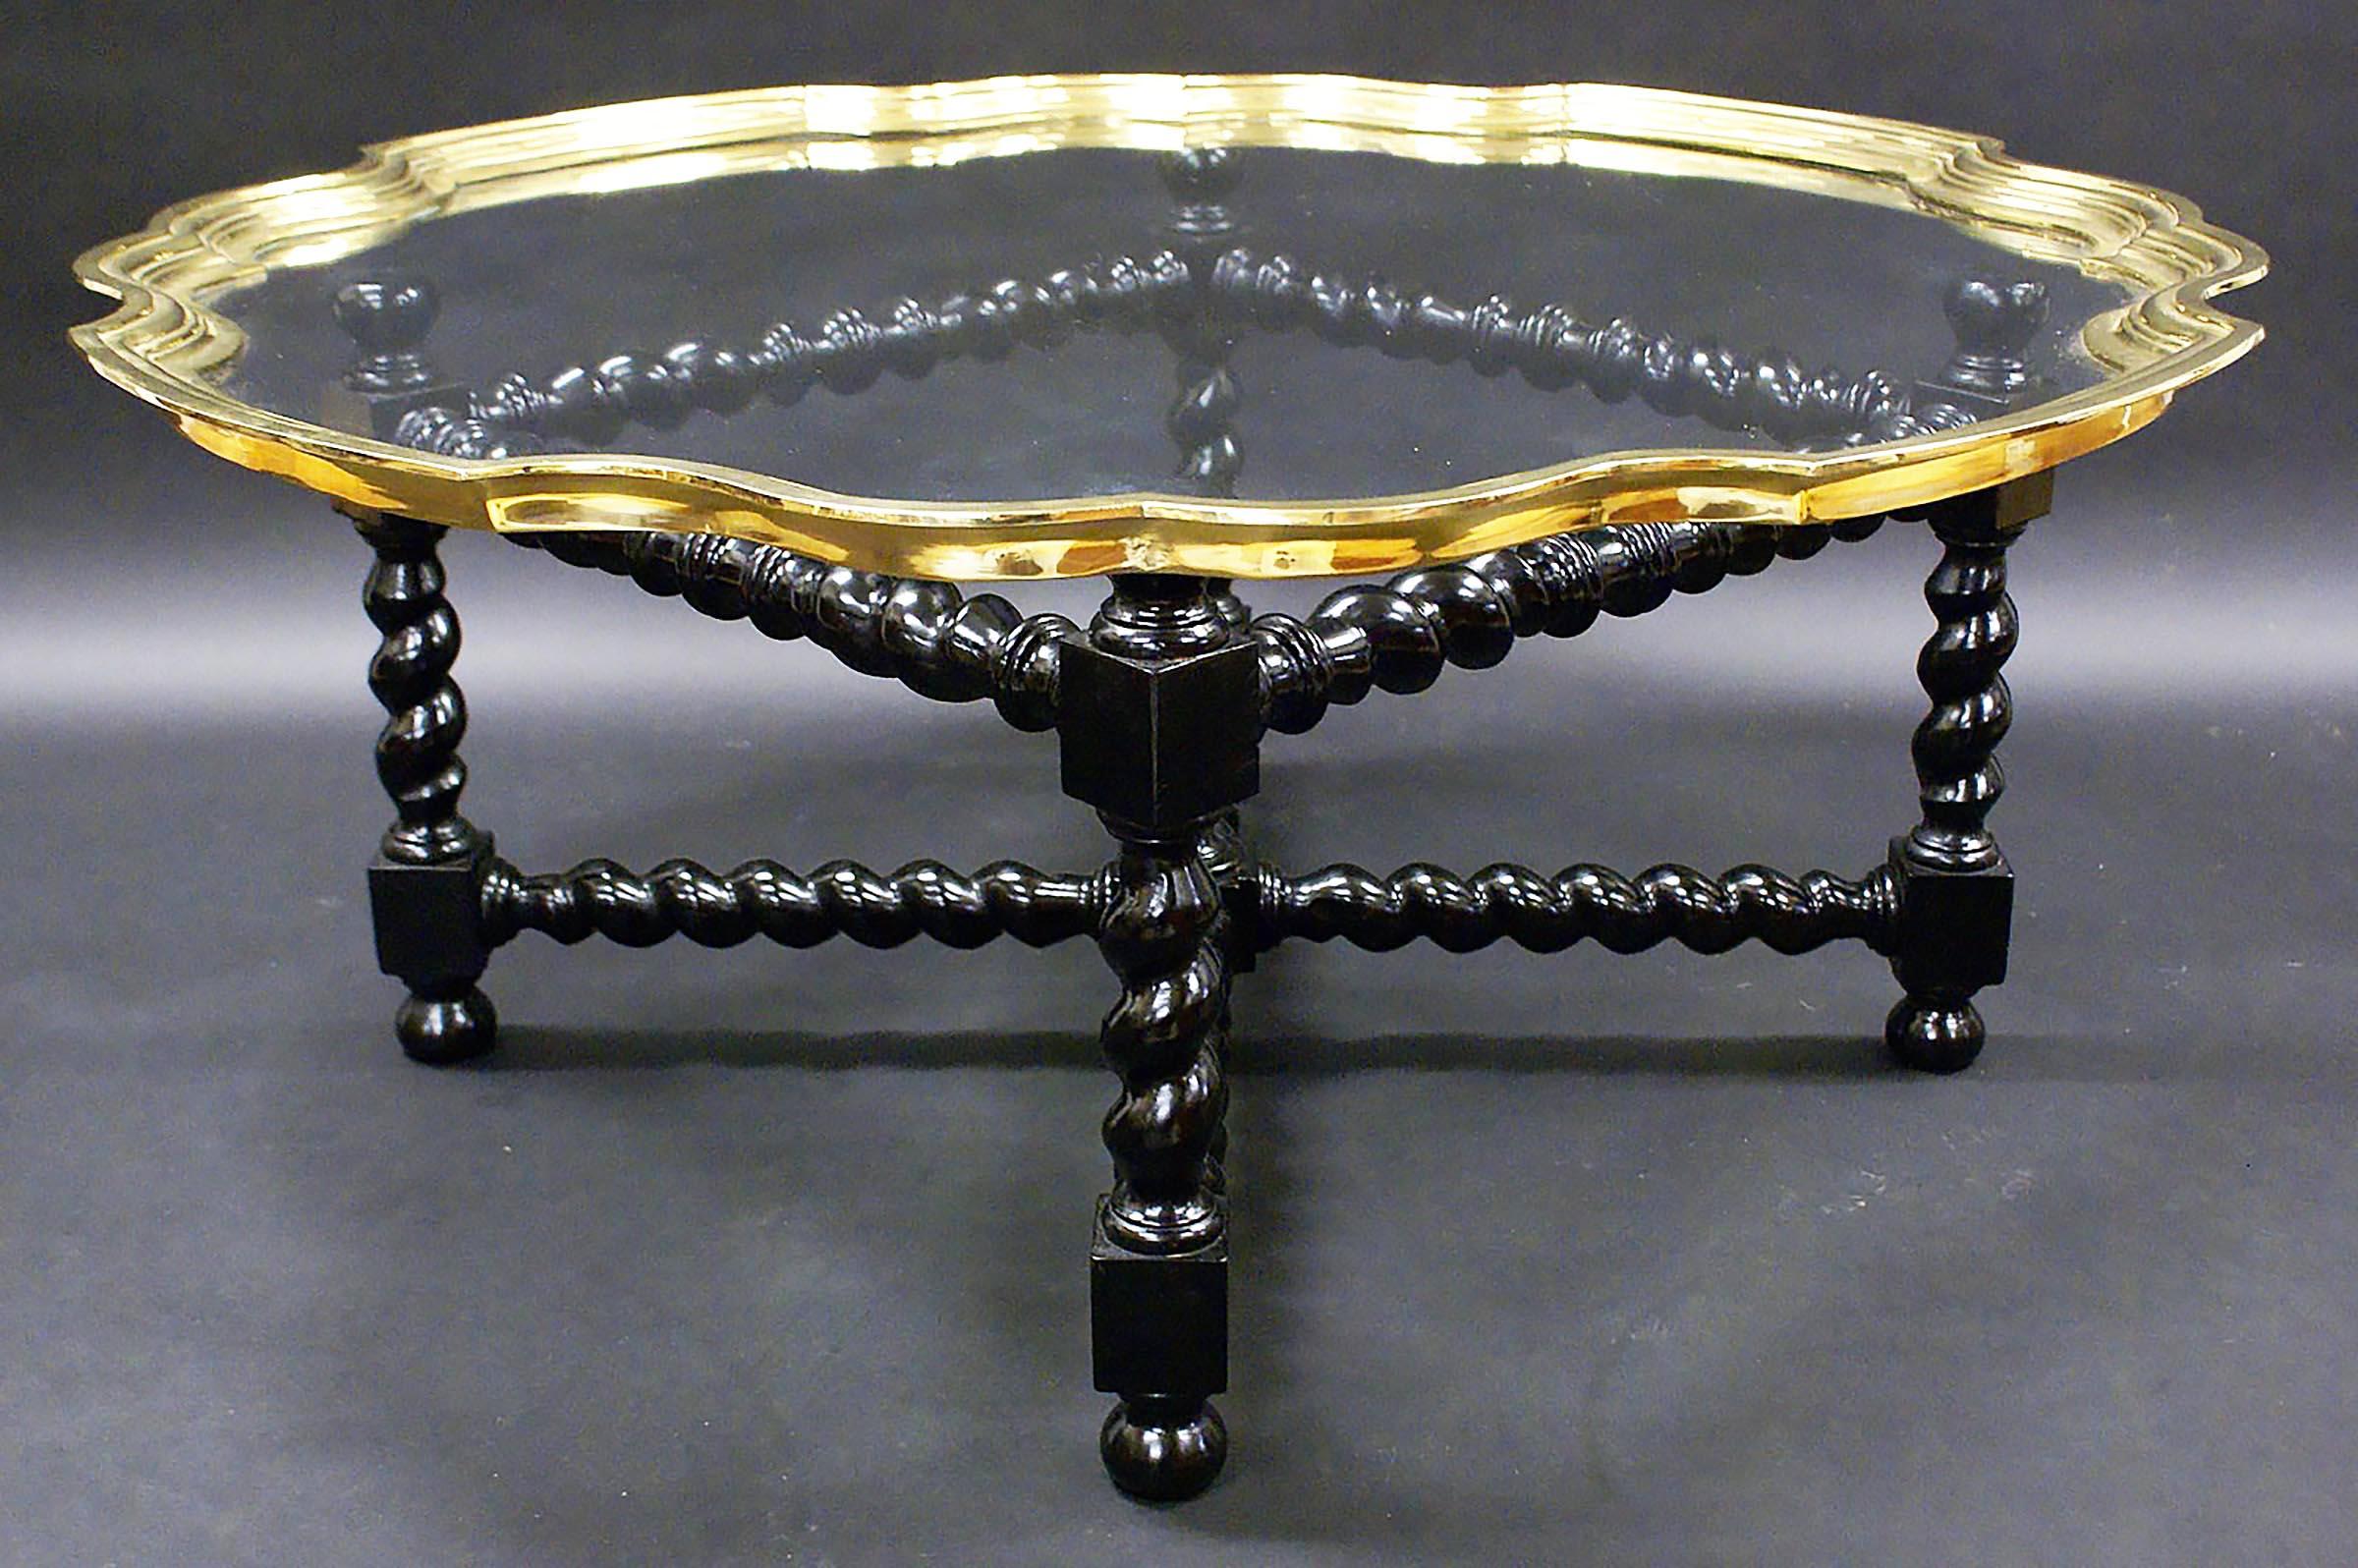 This striking and well-proportioned glass topped early 20th century. coffee table features a lovely brass pie crust shaped edge with a barley twist ebonized base and ‘X’ frame stretcher base, and was originally sold thru Harrods of London. The table